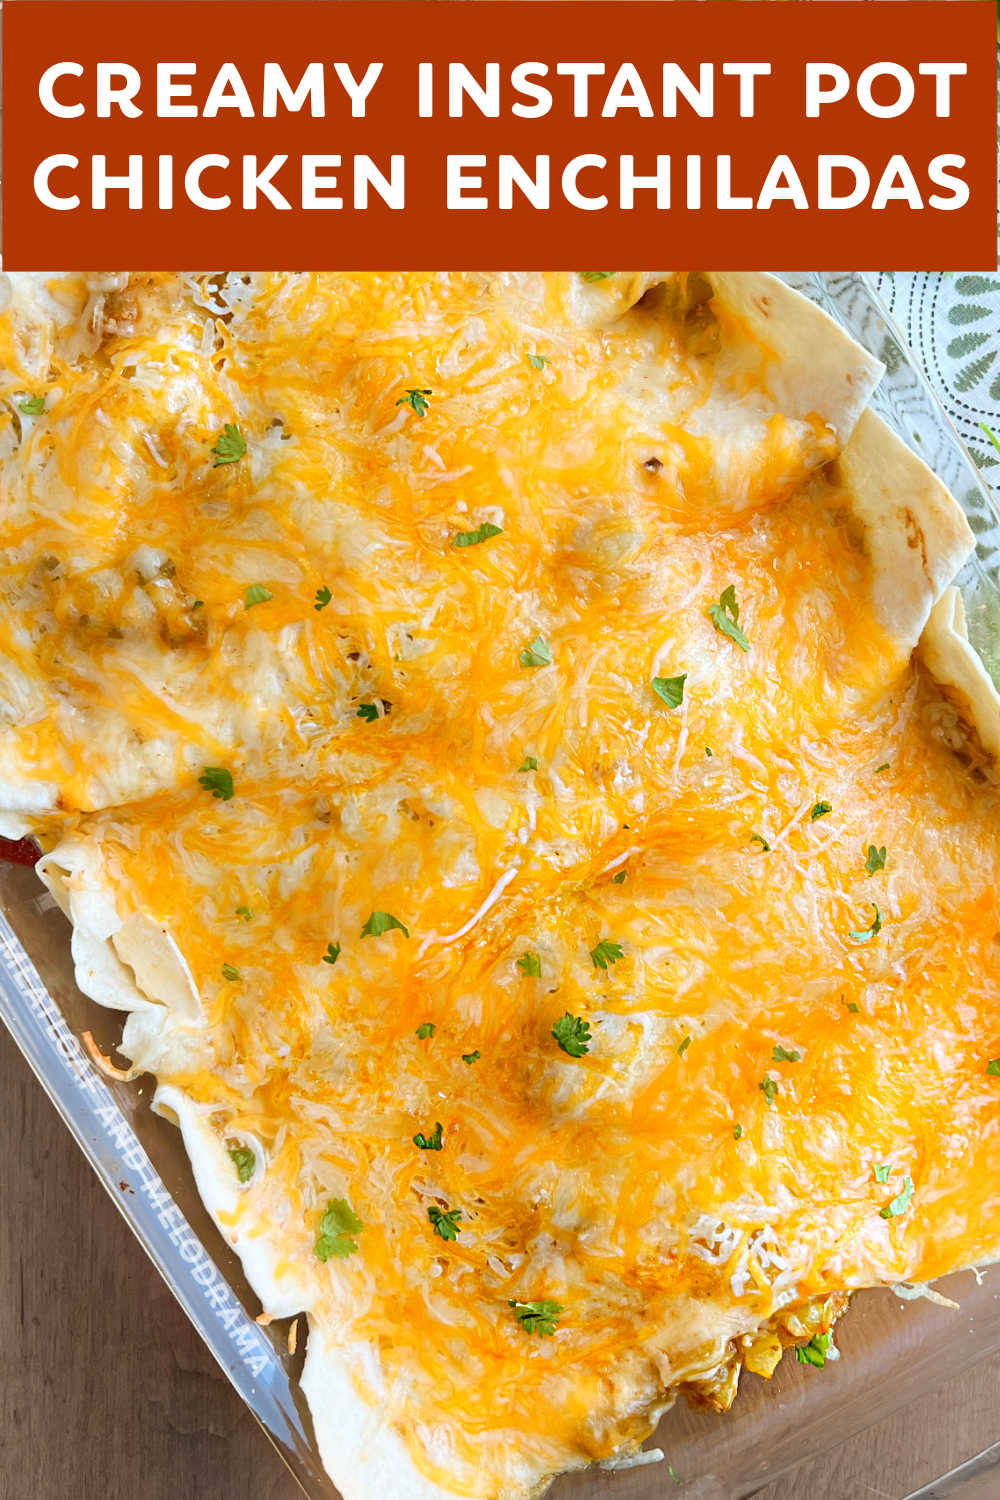 Instant Pot Chicken Enchiladas with cream cheese and salsa verde shredded chicken in homemade sauce is an easy chicken enchilada recipe everyone loves. This delicious dinner is a family favorite and a great recipe to make ahead of time. via @meamel